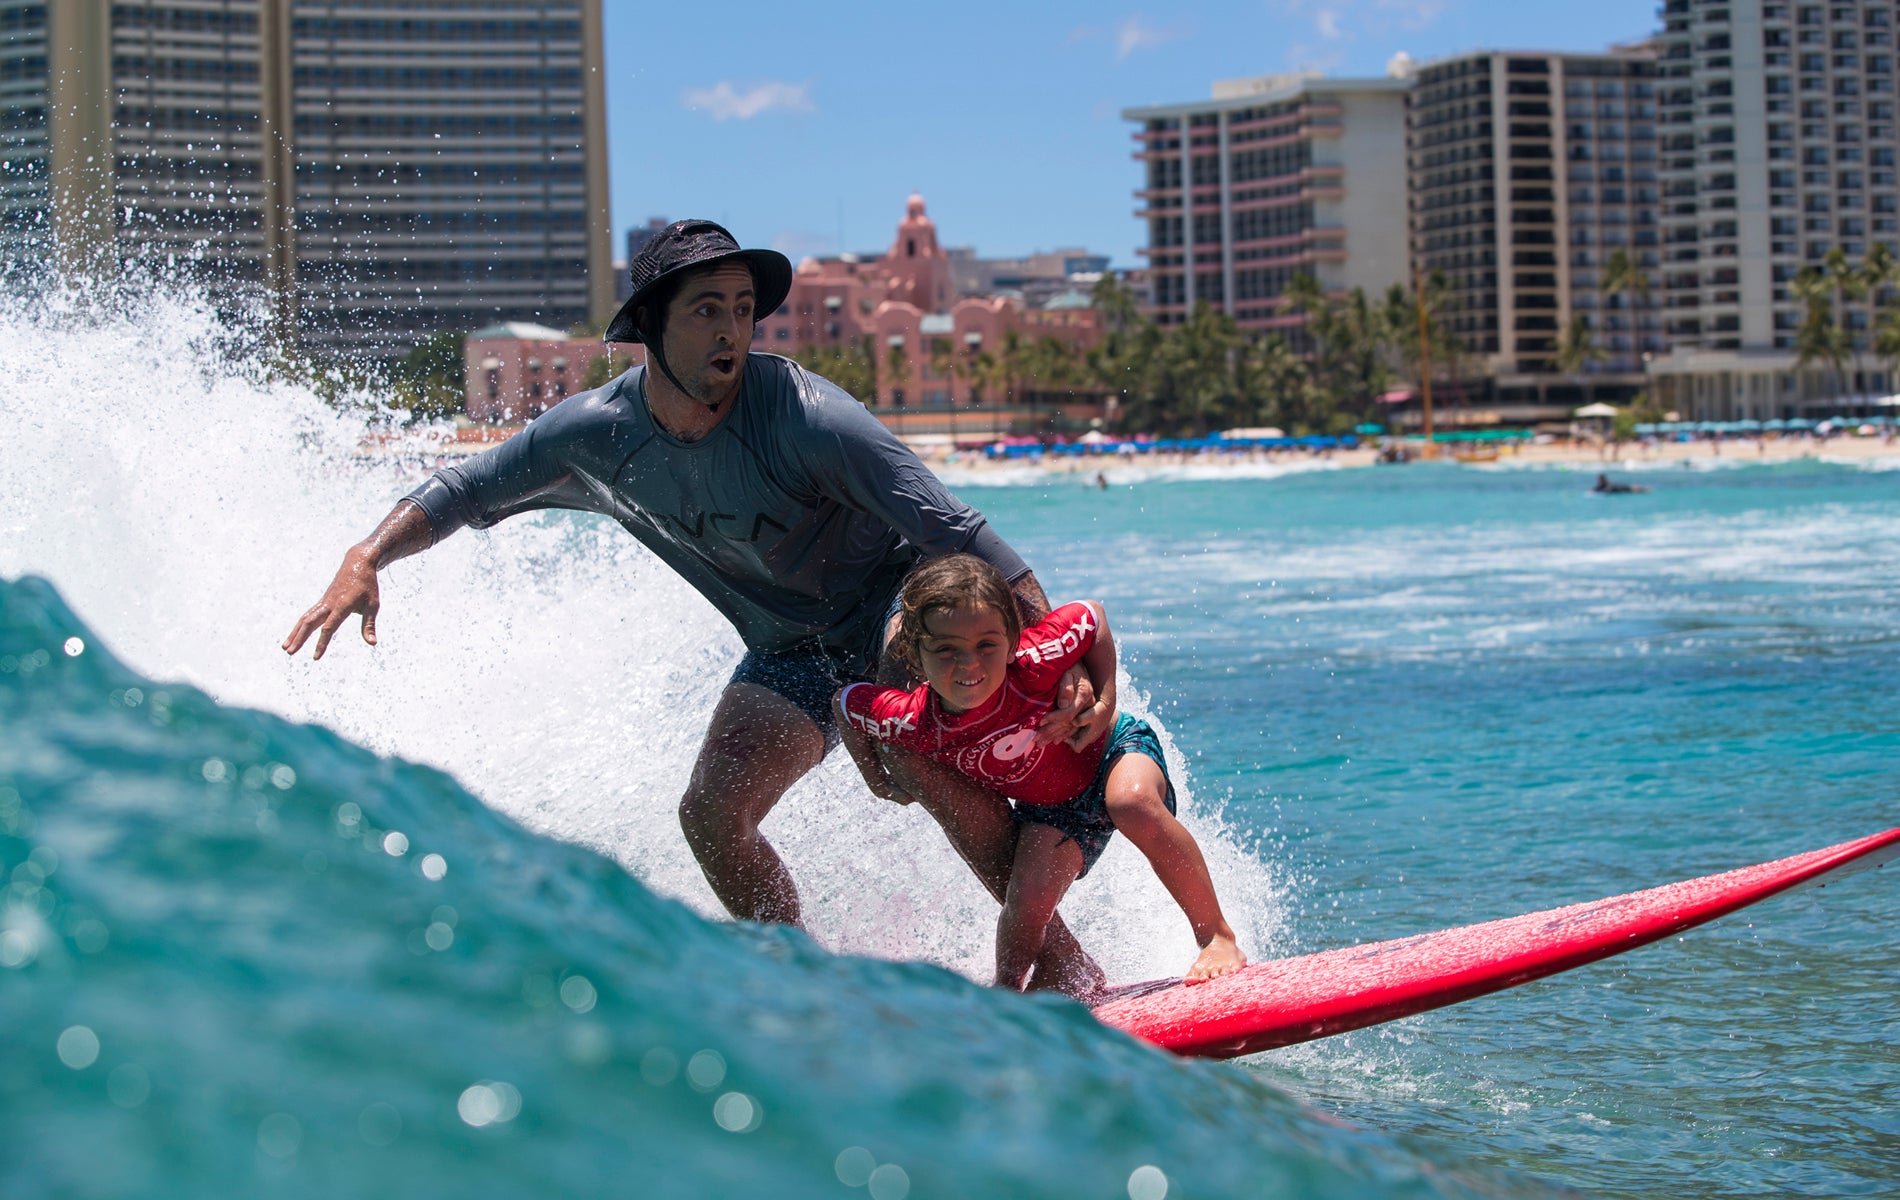 Billy and Lion Kemper compete in the FreeSurf Expression Session